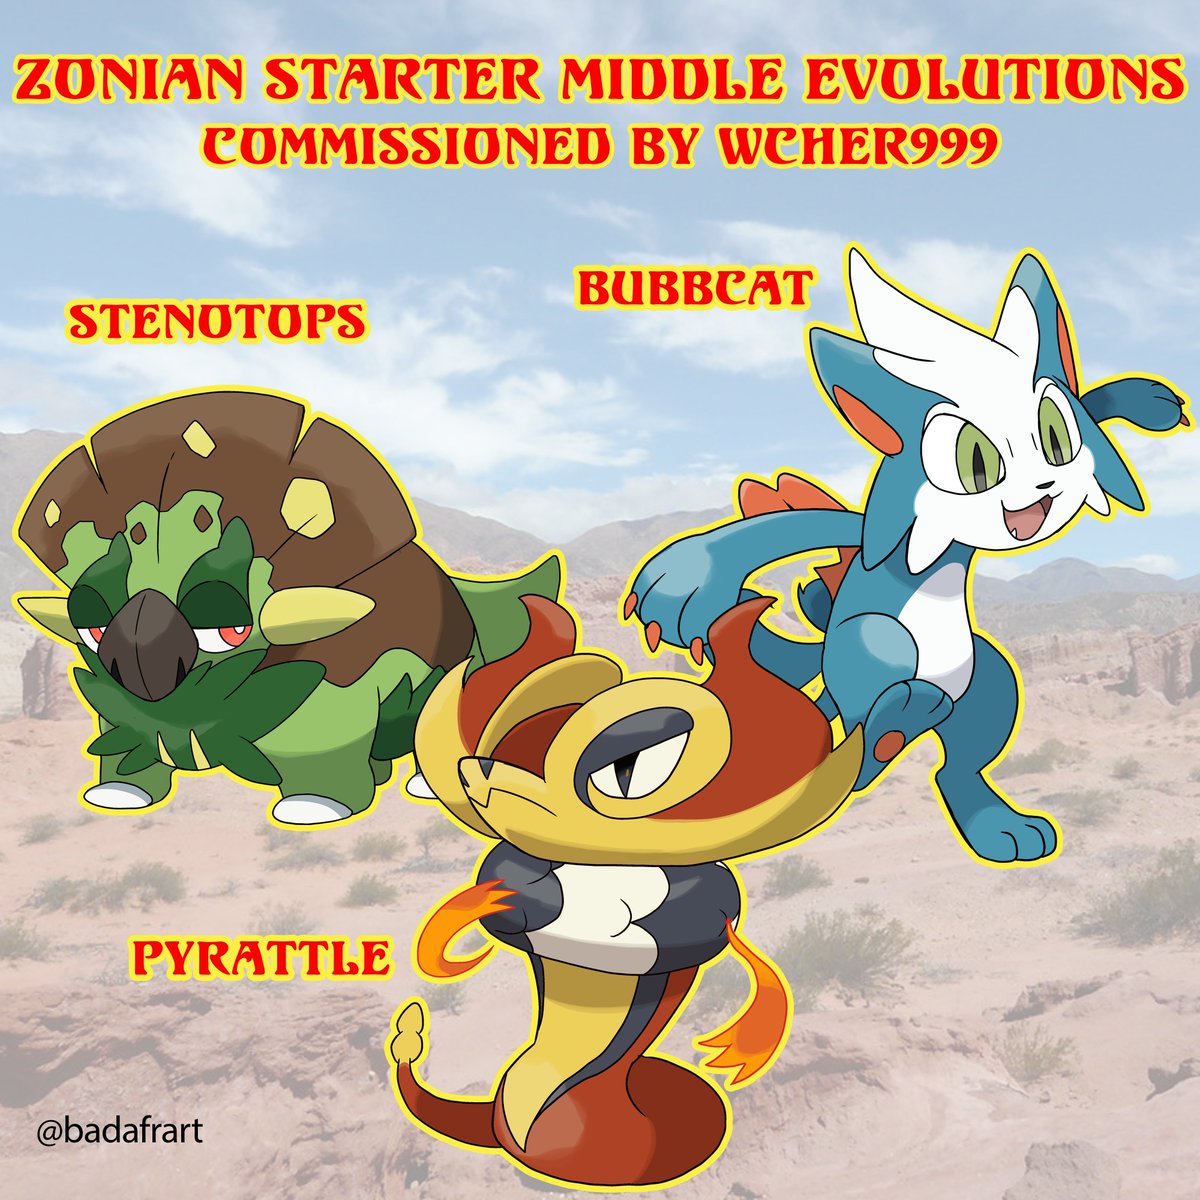 Meet the Zonian Starters Middle evolution!
Commissioned from @wcher999
#fakemon #fakémon #fakemons #fakemonart #fakemondex #fakemondesign #fakemonregion #fakemonartist #fakemonstarters #fakemonchallenge #kensugimori #kensugimoriart #kensugimoristyle